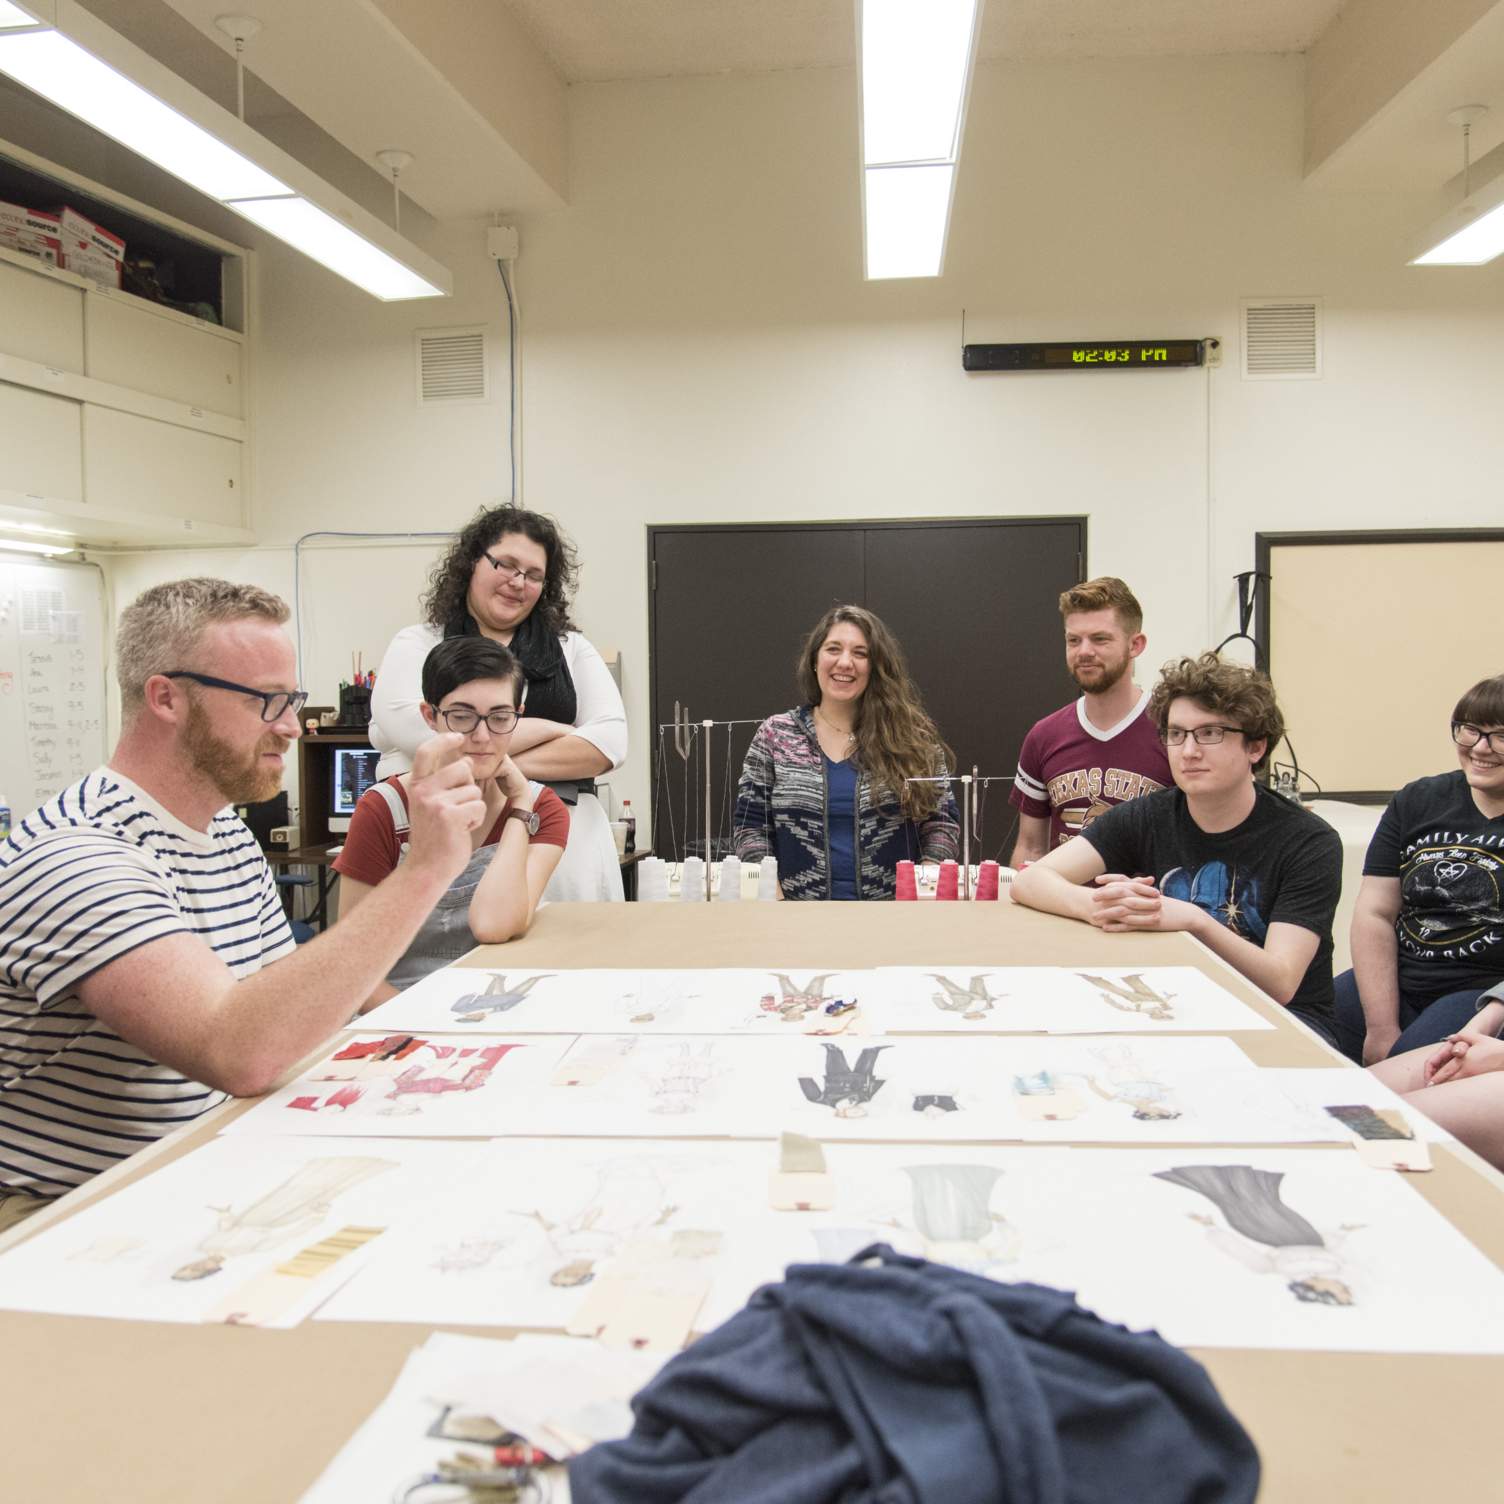 Professor discusses the details of Intimate Apparel during a costume design presentation.